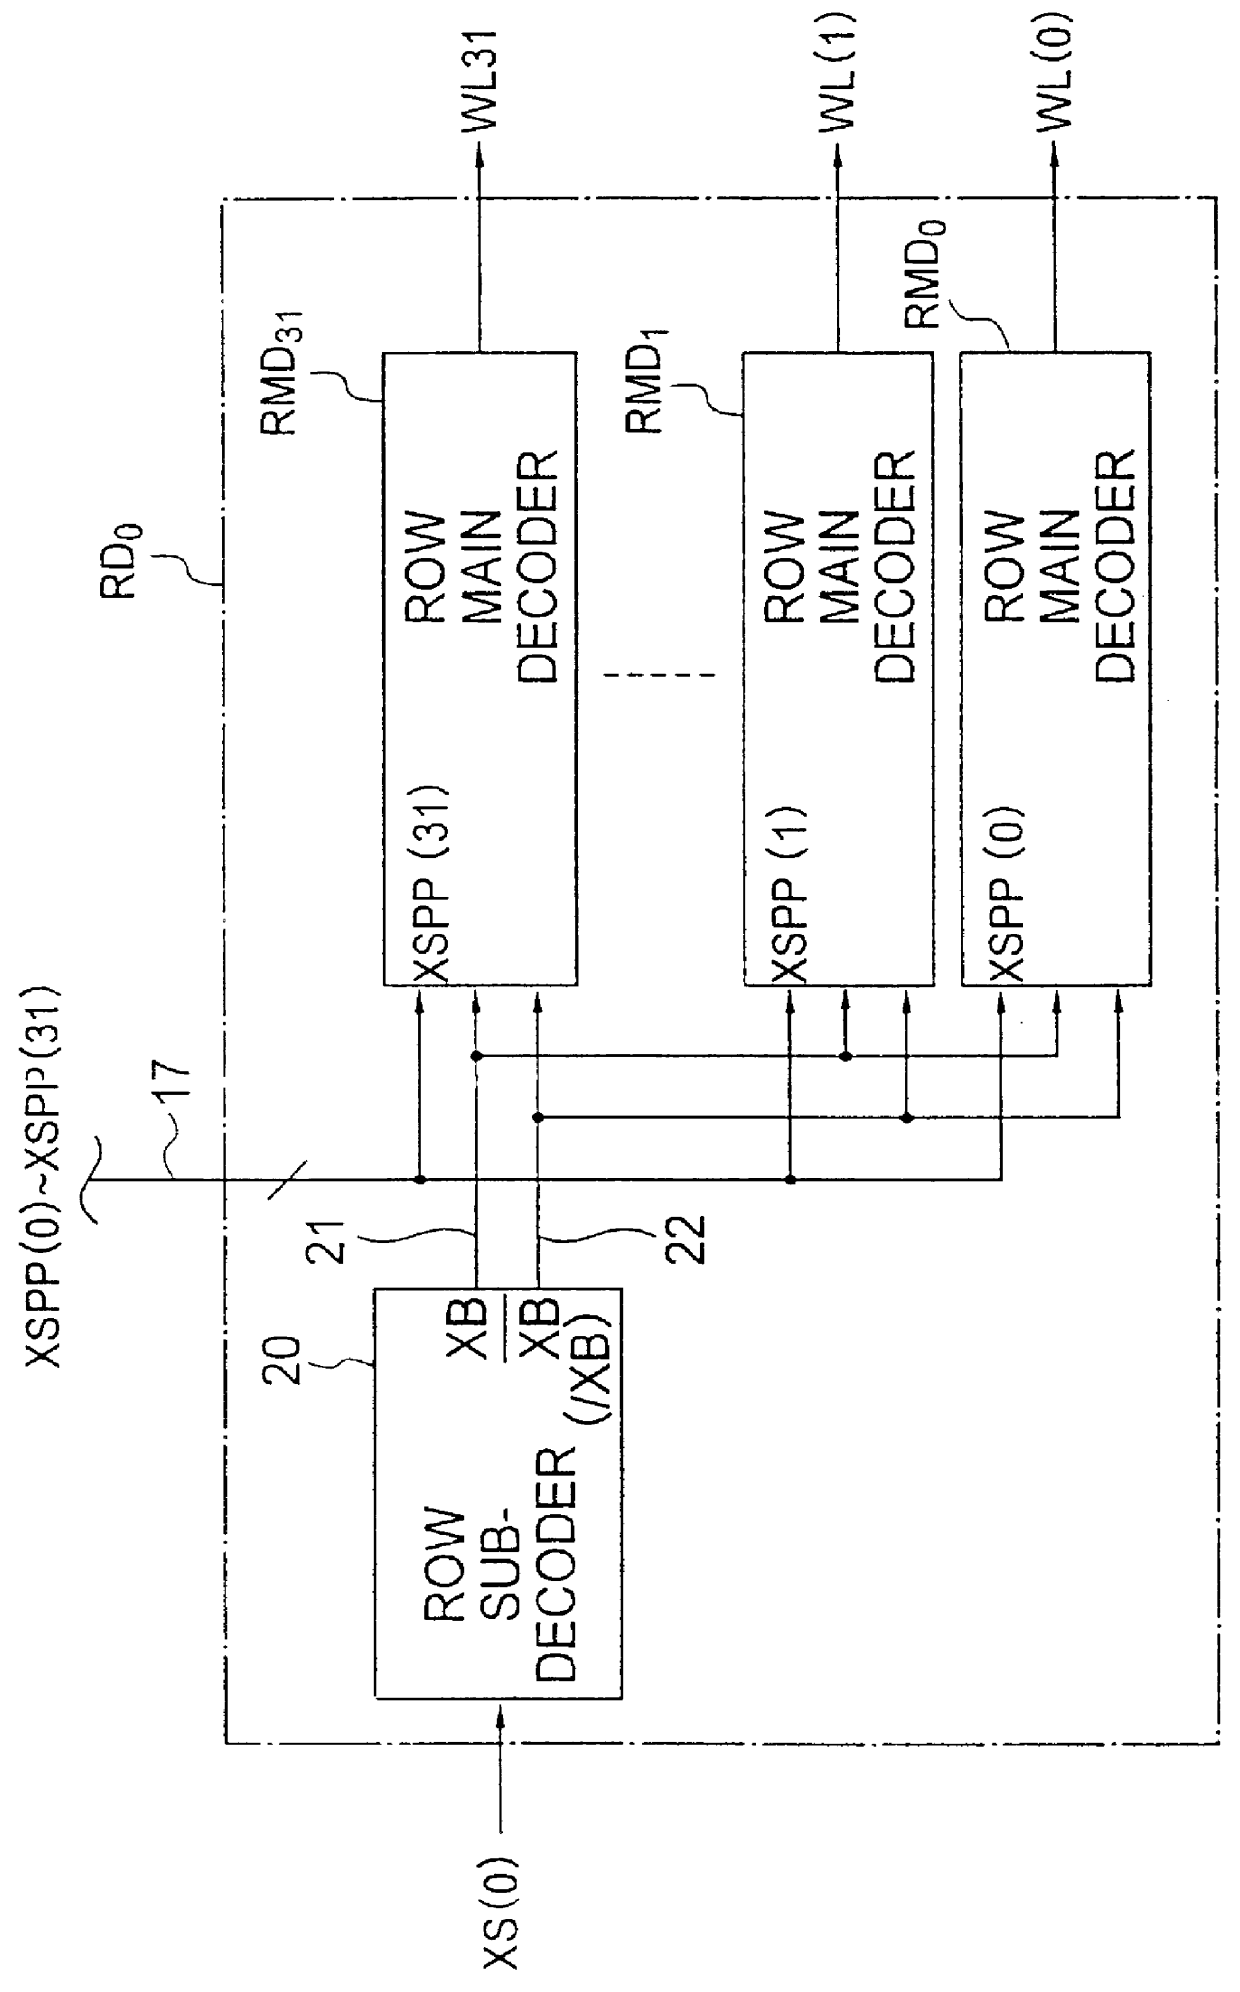 Non-volatile semiconductor memory device for selective cell flash erasing/programming